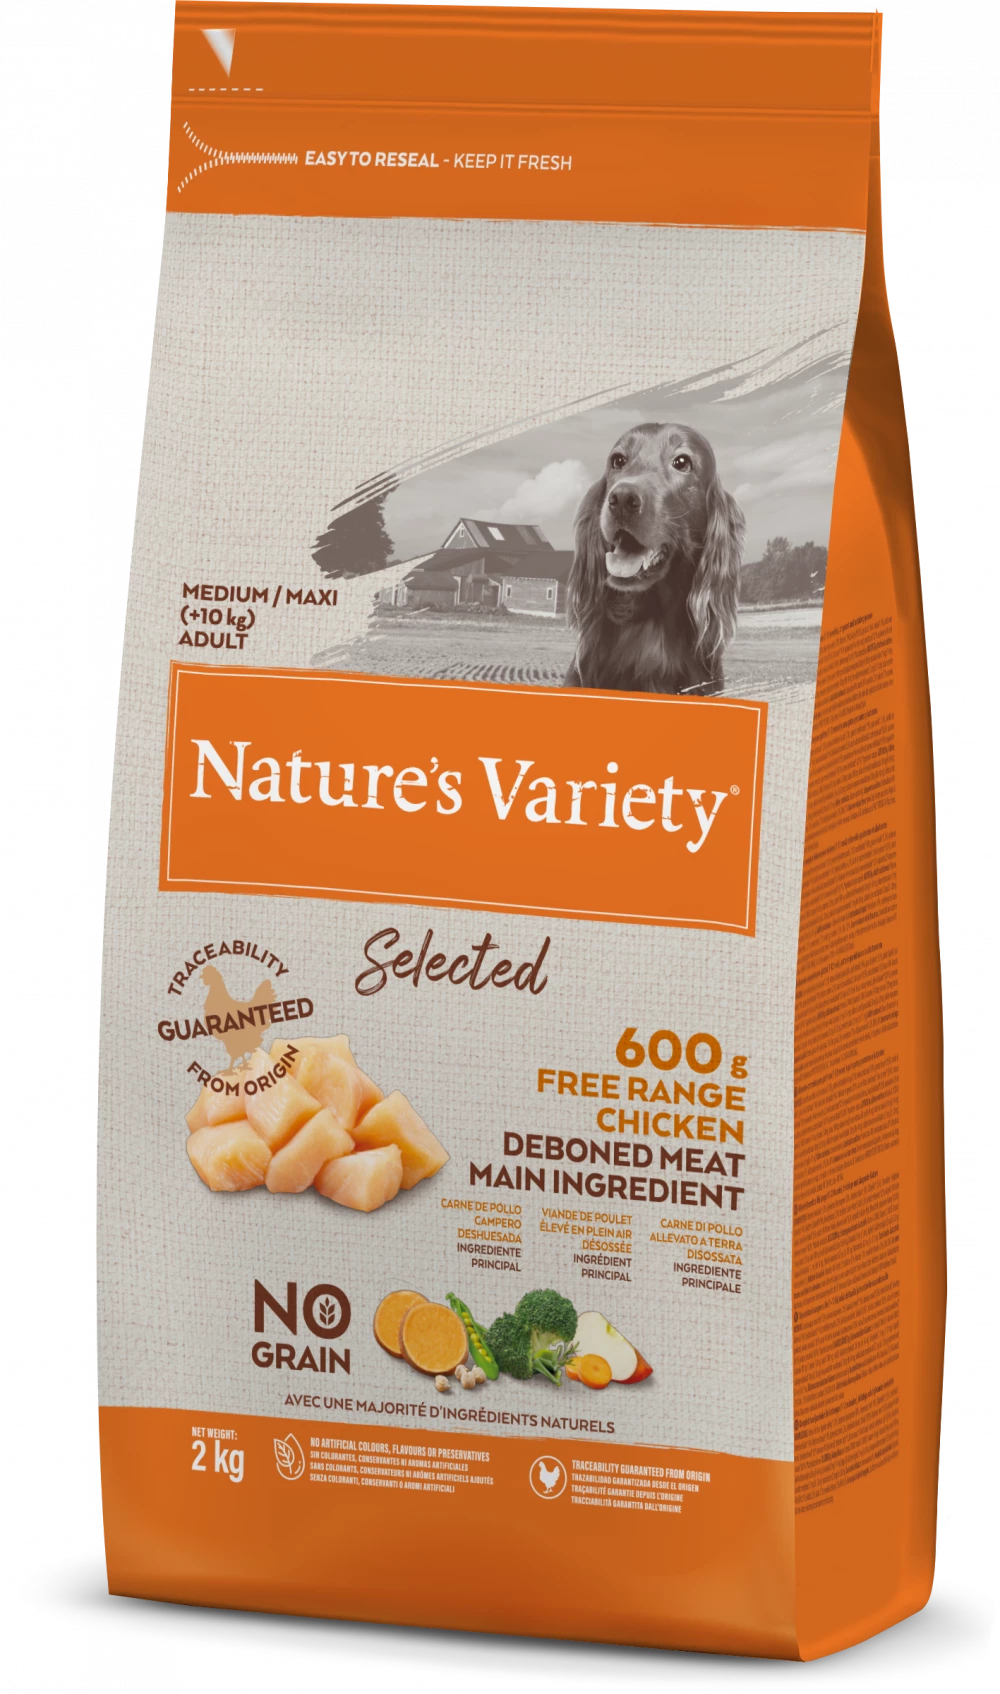 Nature's Variety Selected Dry Free Range Chicken for Adult Dogs